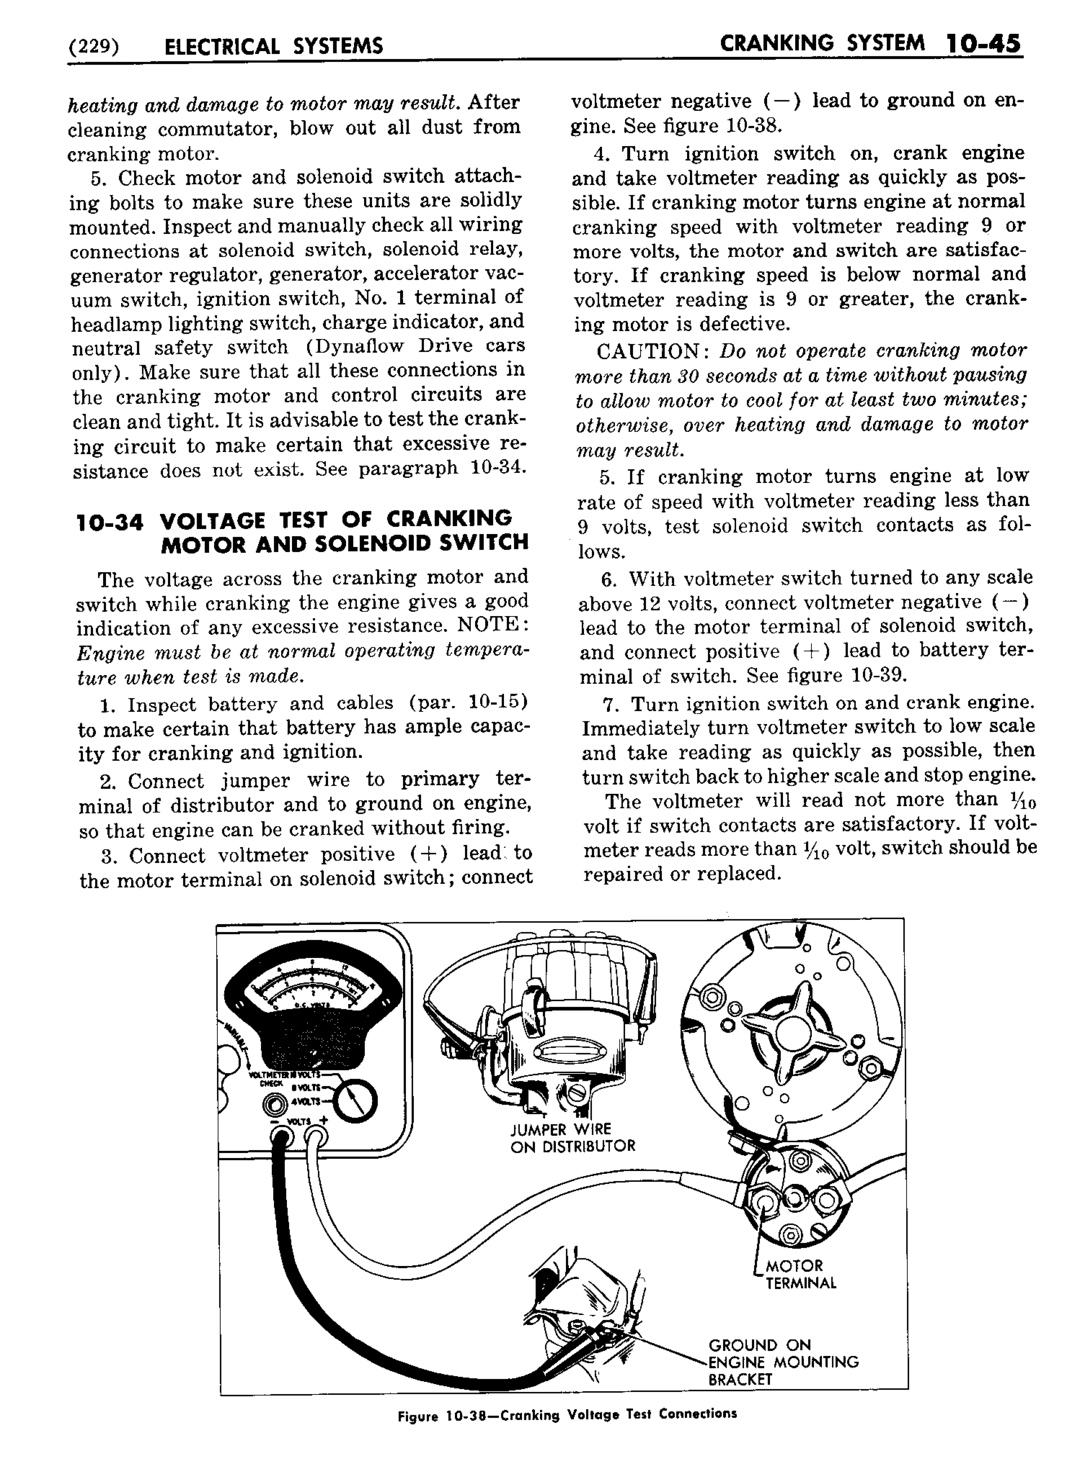 n_11 1953 Buick Shop Manual - Electrical Systems-045-045.jpg